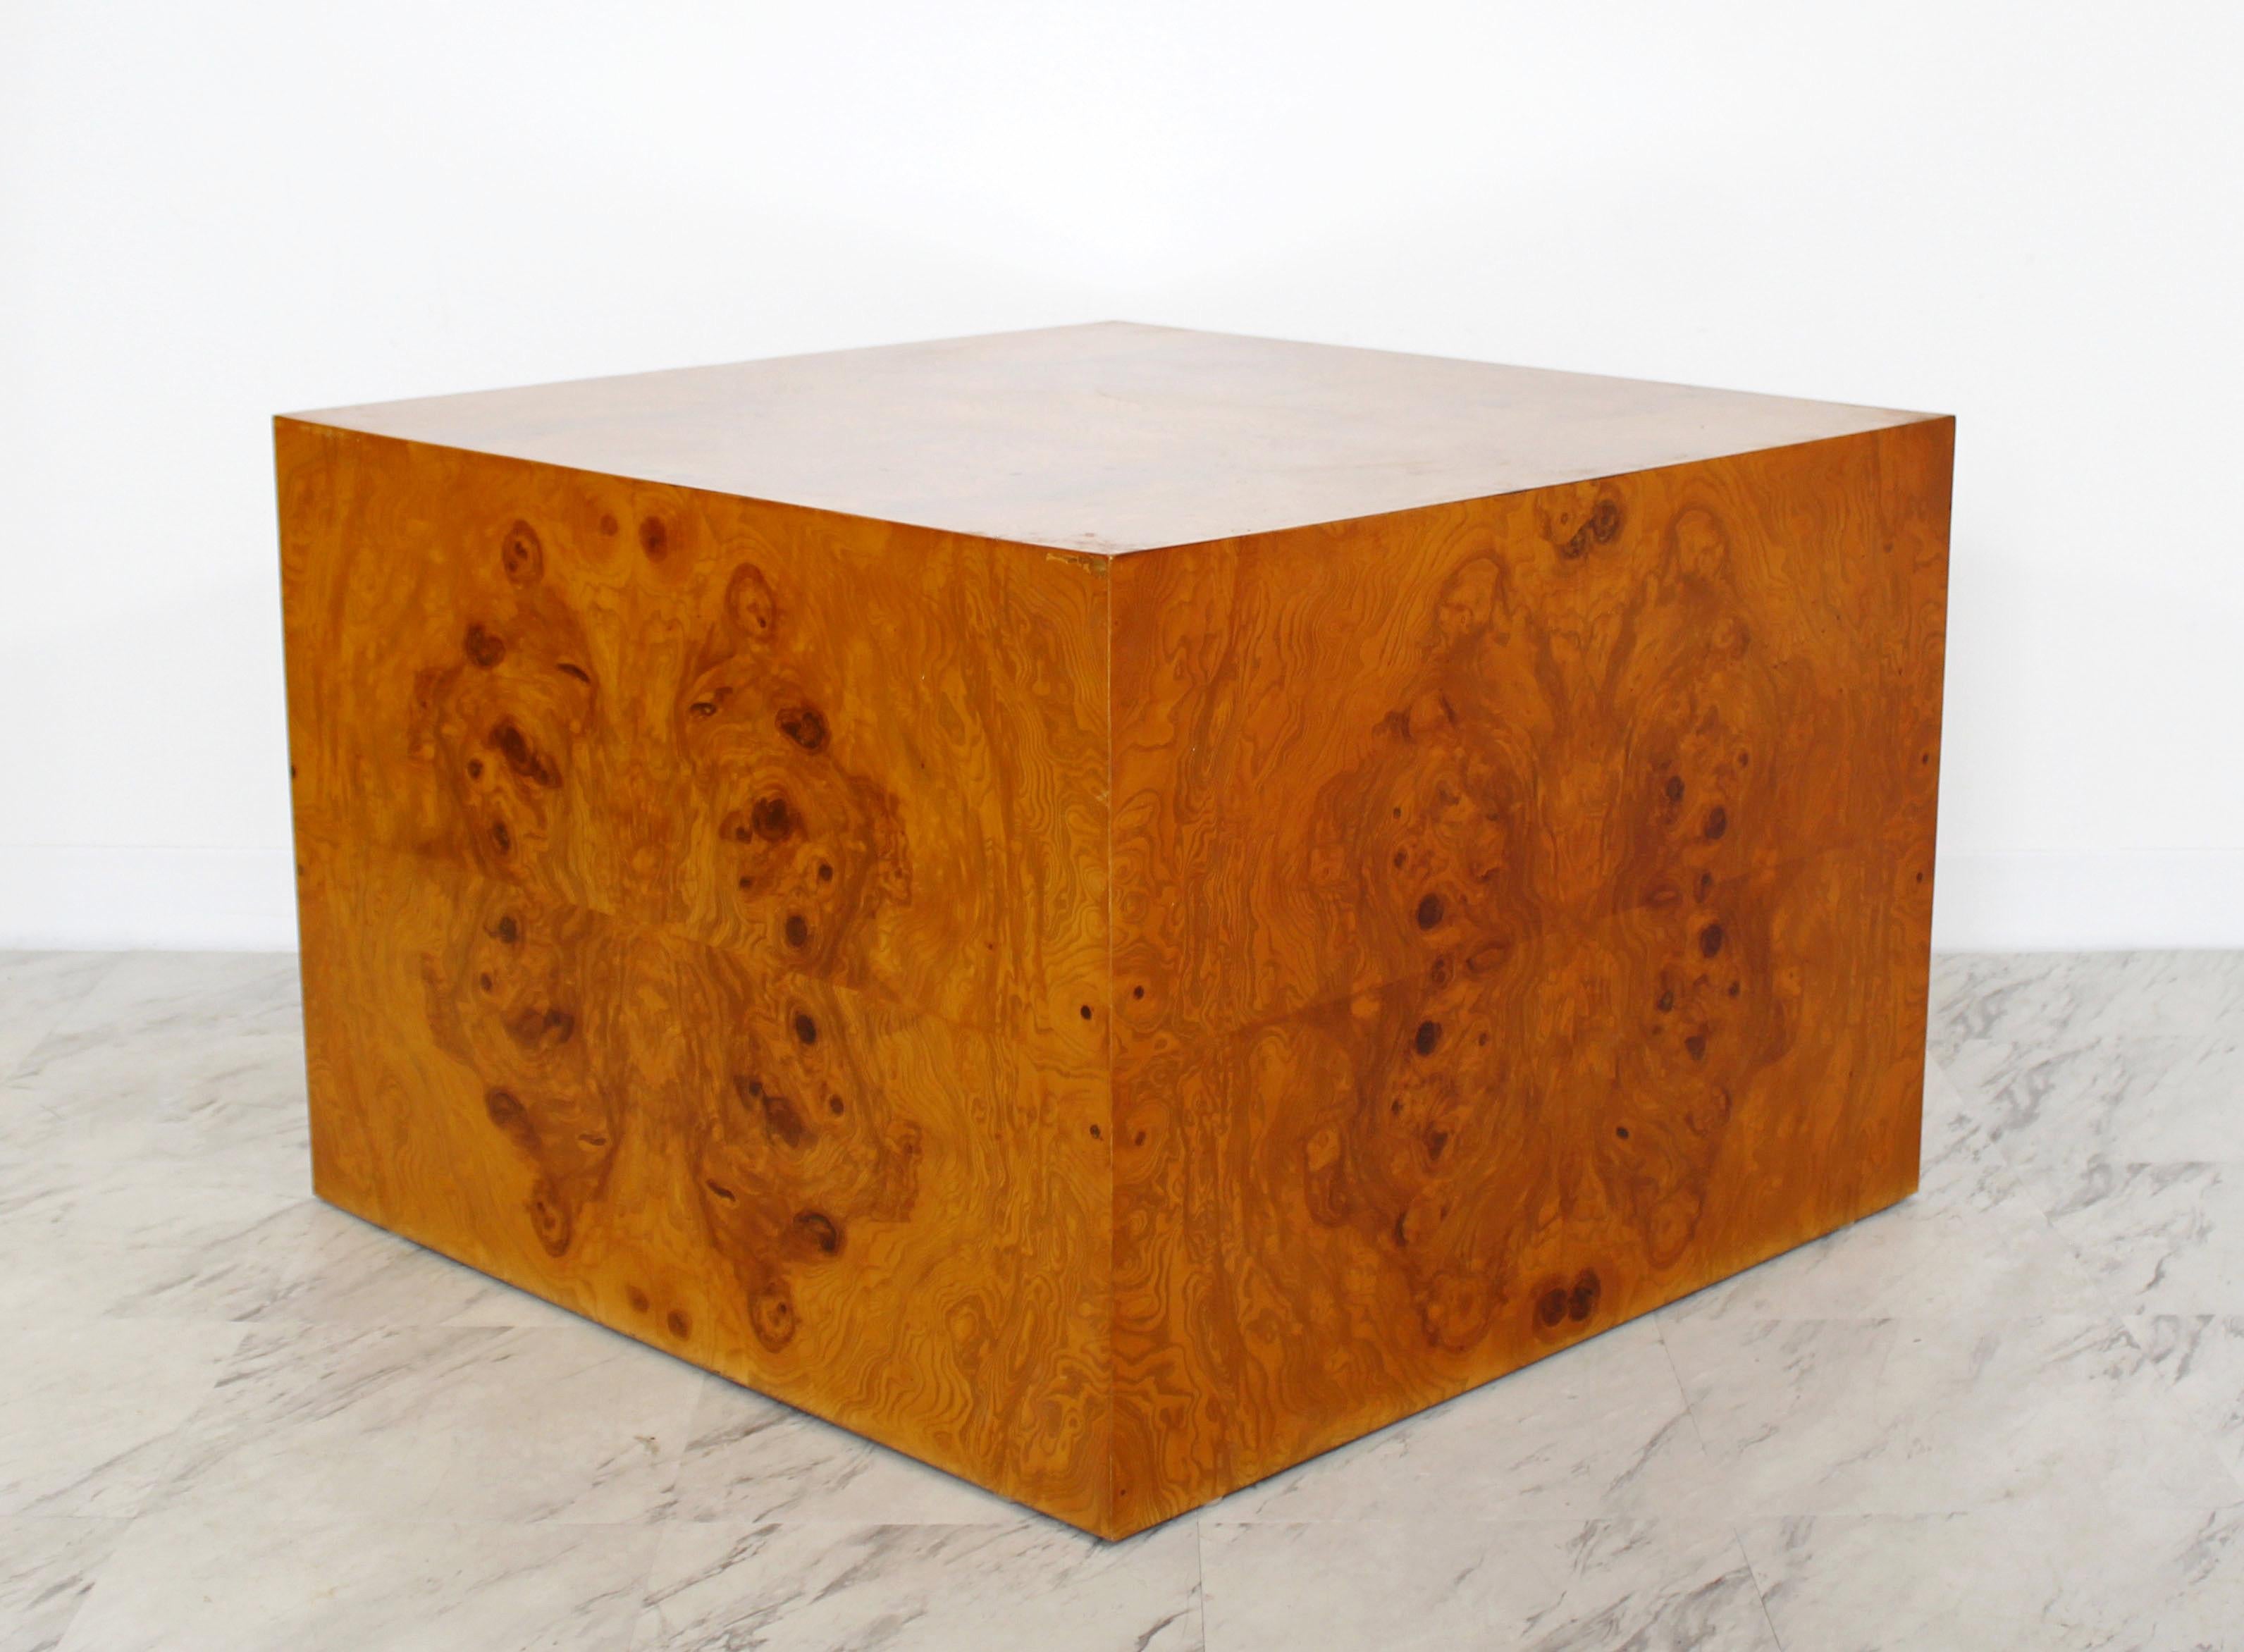 For your consideration is a fabulous, cube coffee table, made of burl wood, by Milo Baughman for Thayer Coggin, circa 1970s. In very good condition. The dimensions are 32